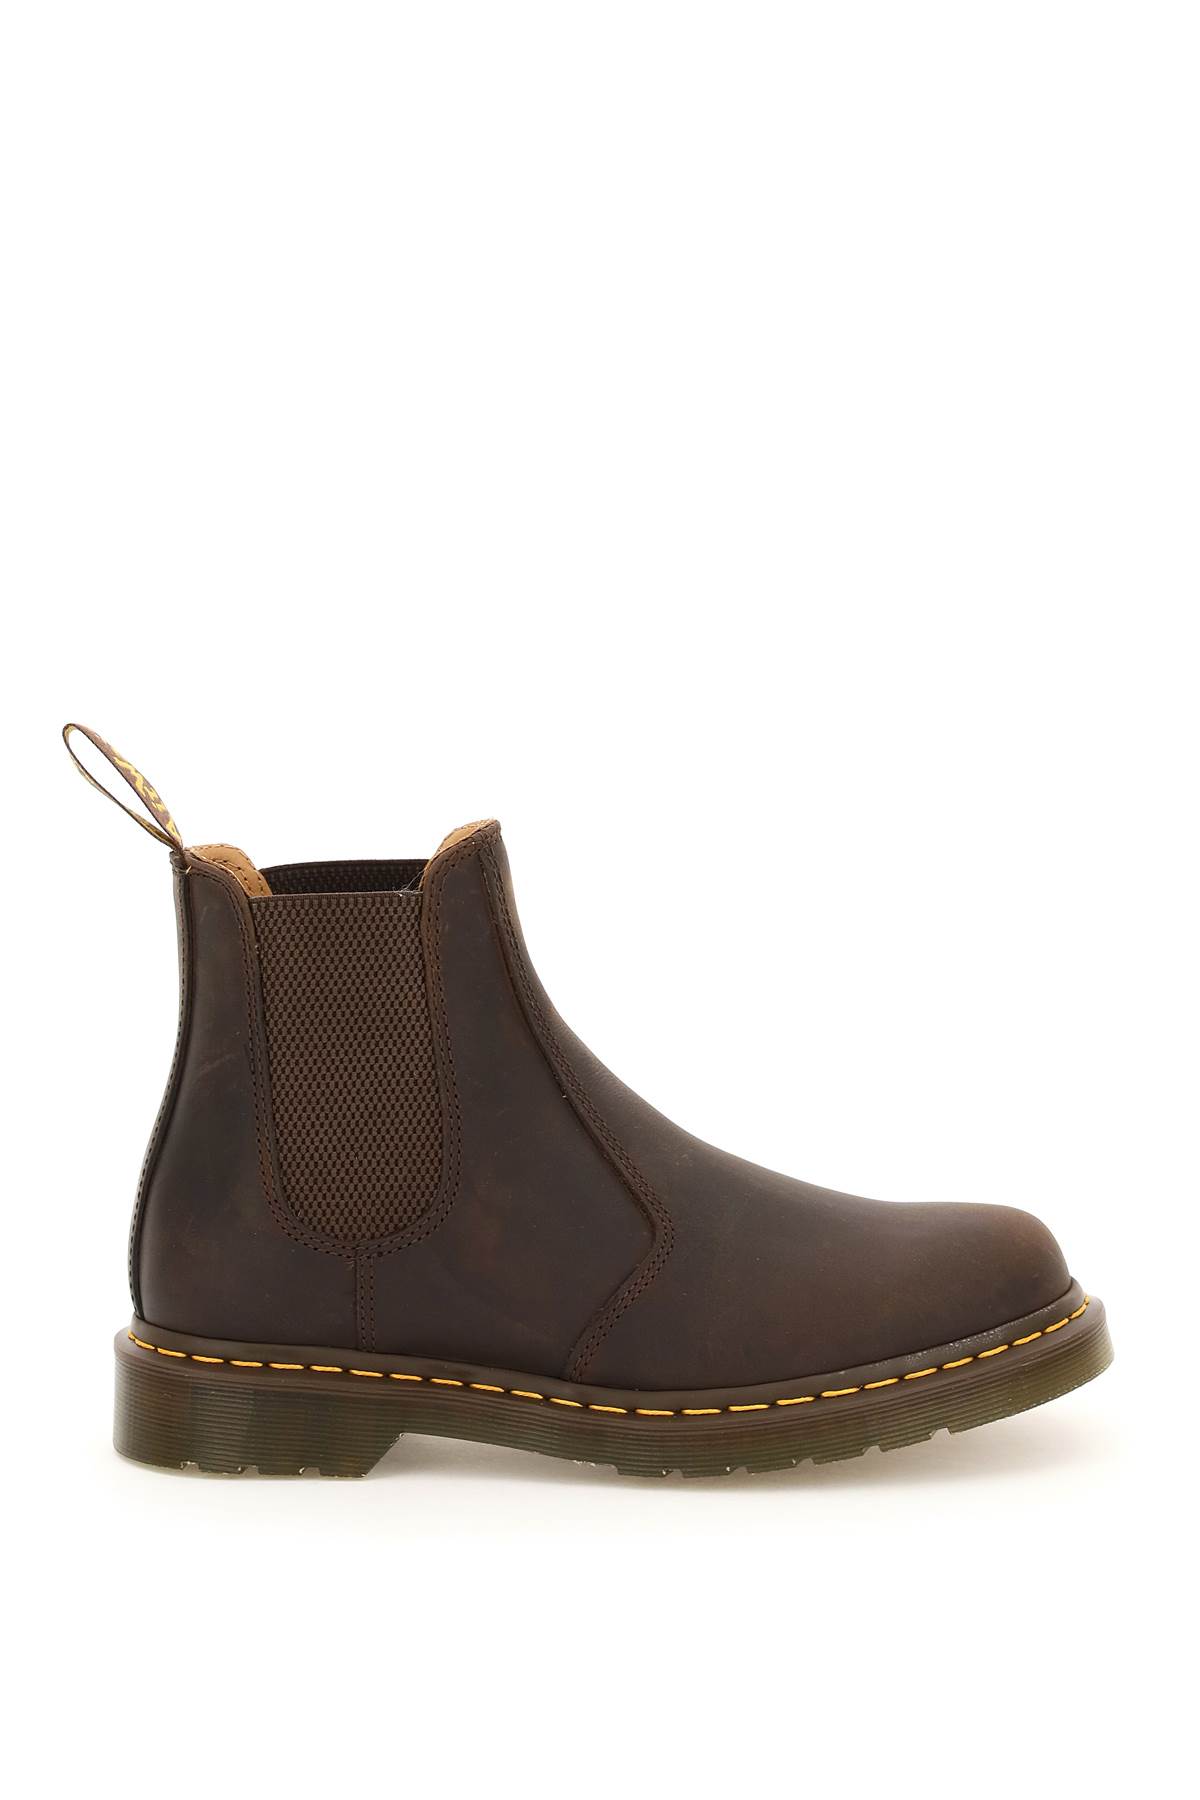 Dr. Martens Crazy Horse Leather 2976 Chelsea Boots